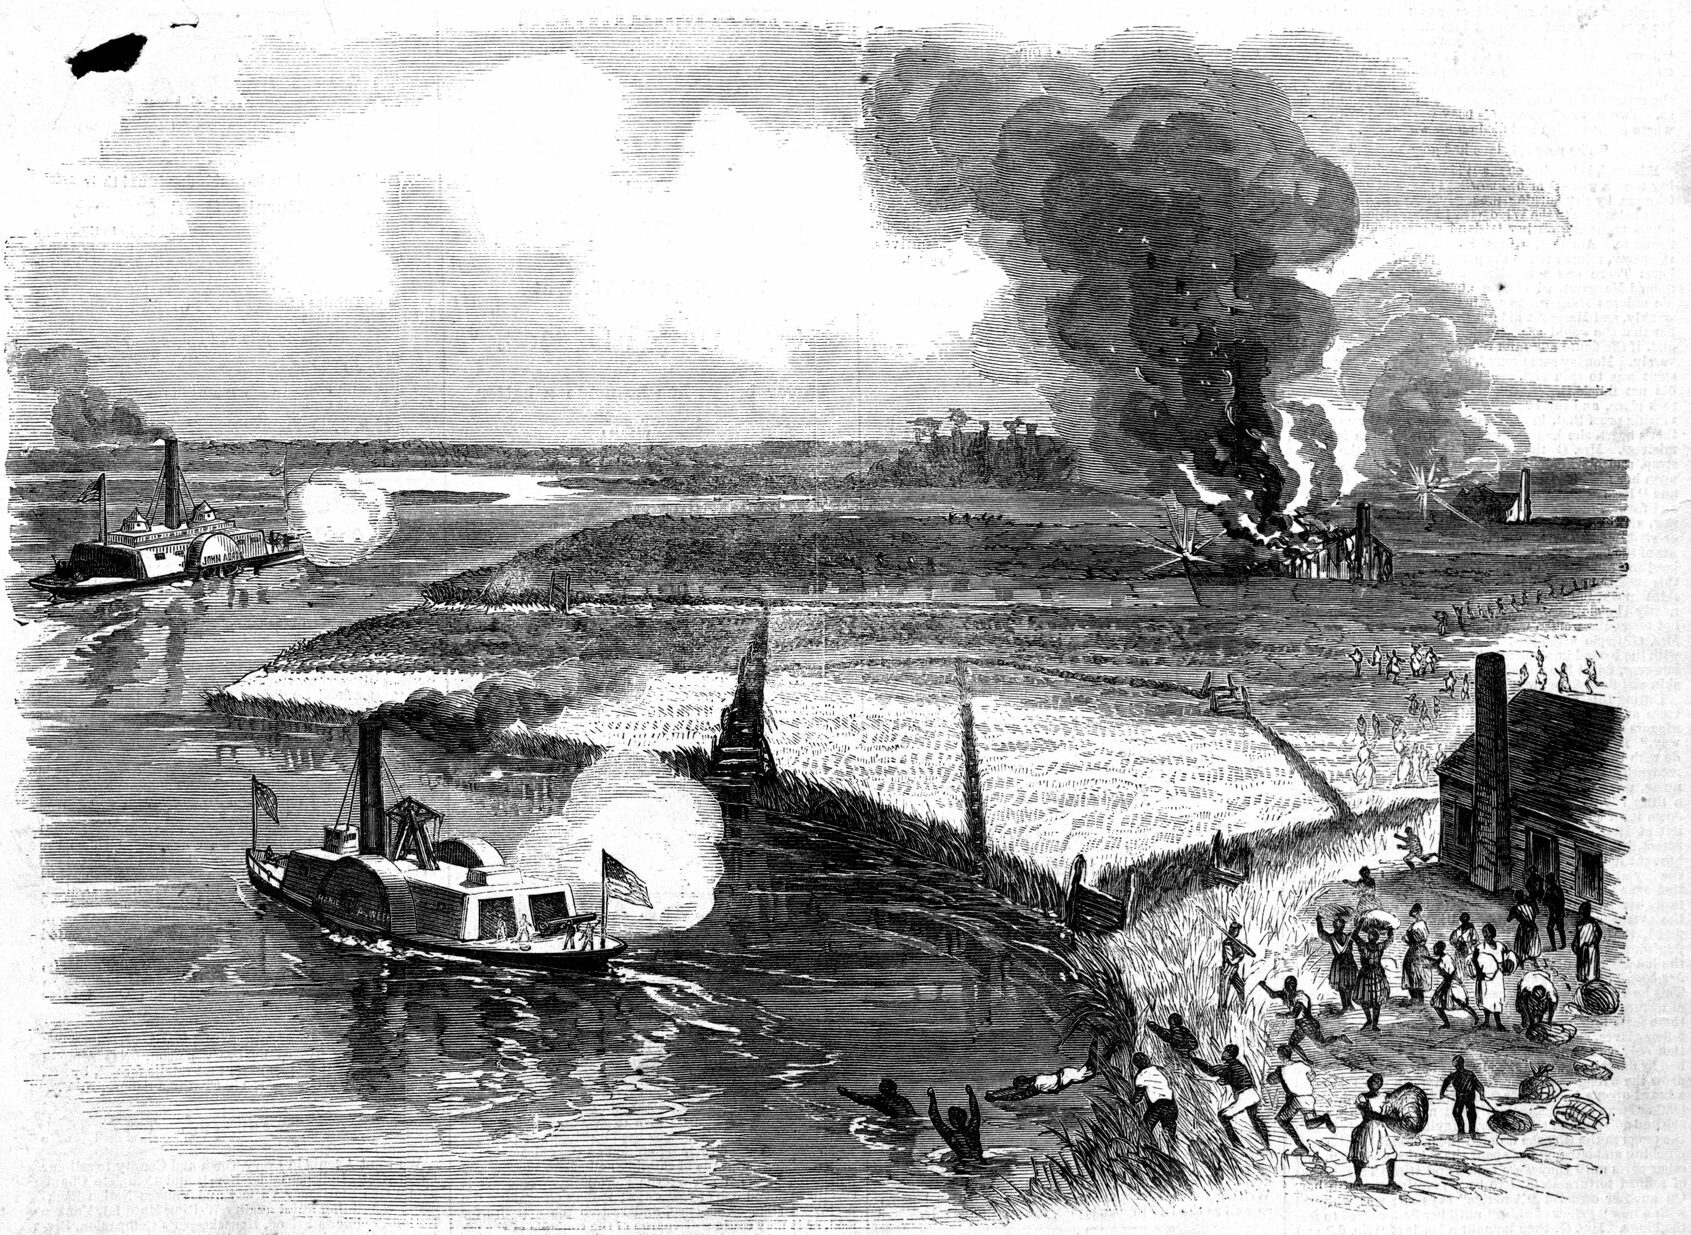 The raid depicted is similar to one against Darien, Georgia, in which the 54th Massachusetts joined the 2nd South Carolina Regiment of U.S. Colored Troops. 